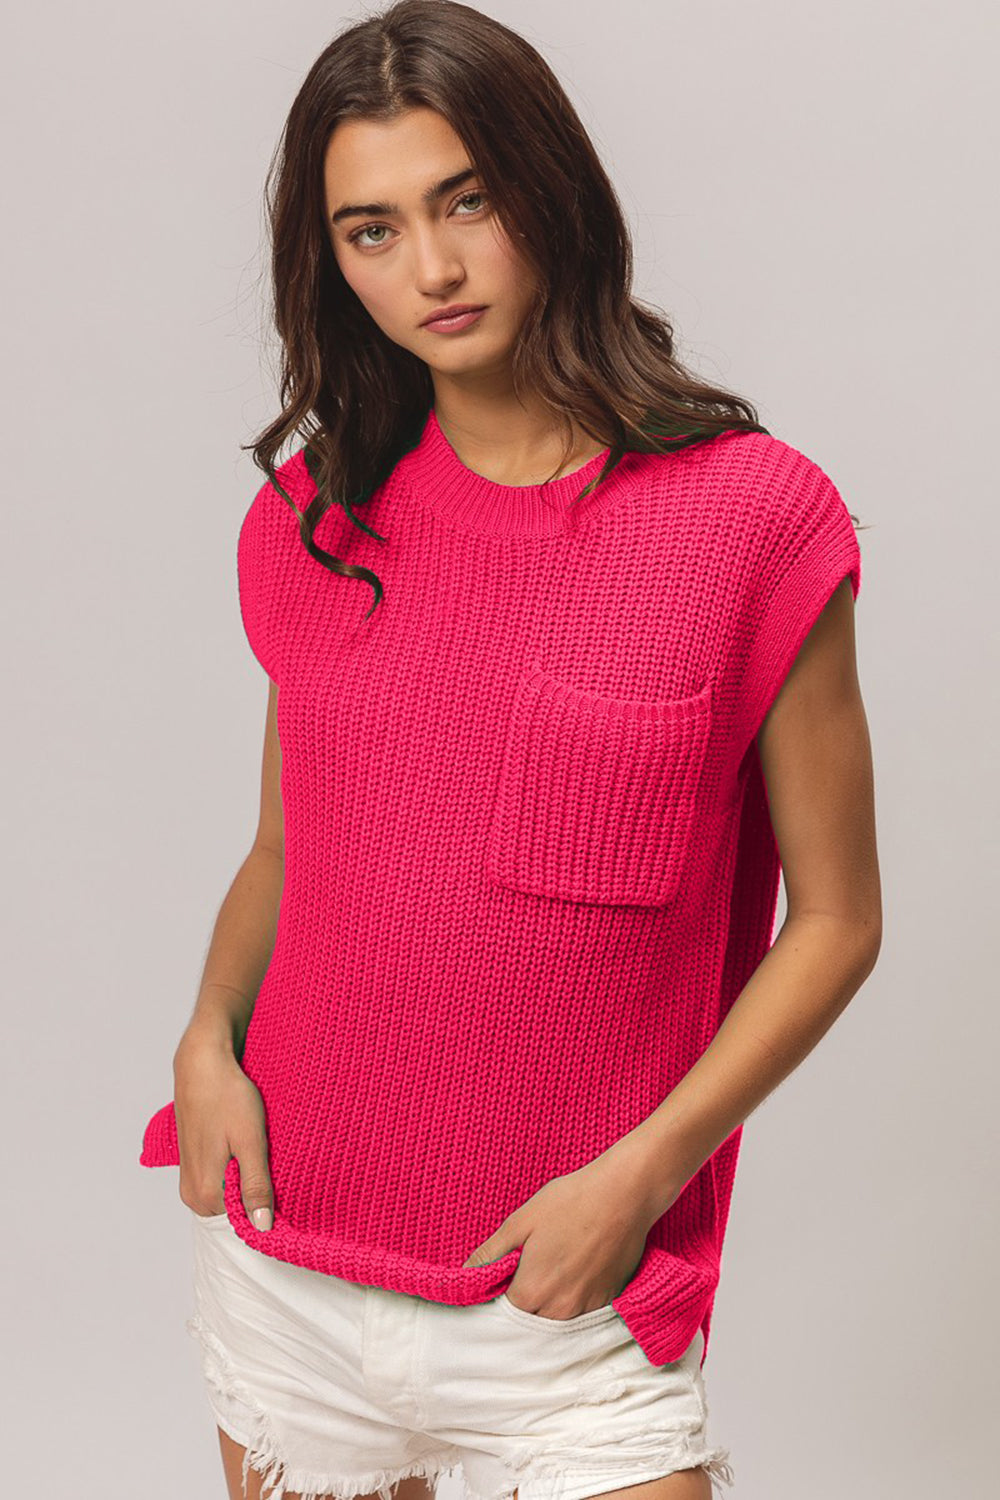 Patch Pocket Cap Sleeve Sweater Top in Fuchsia